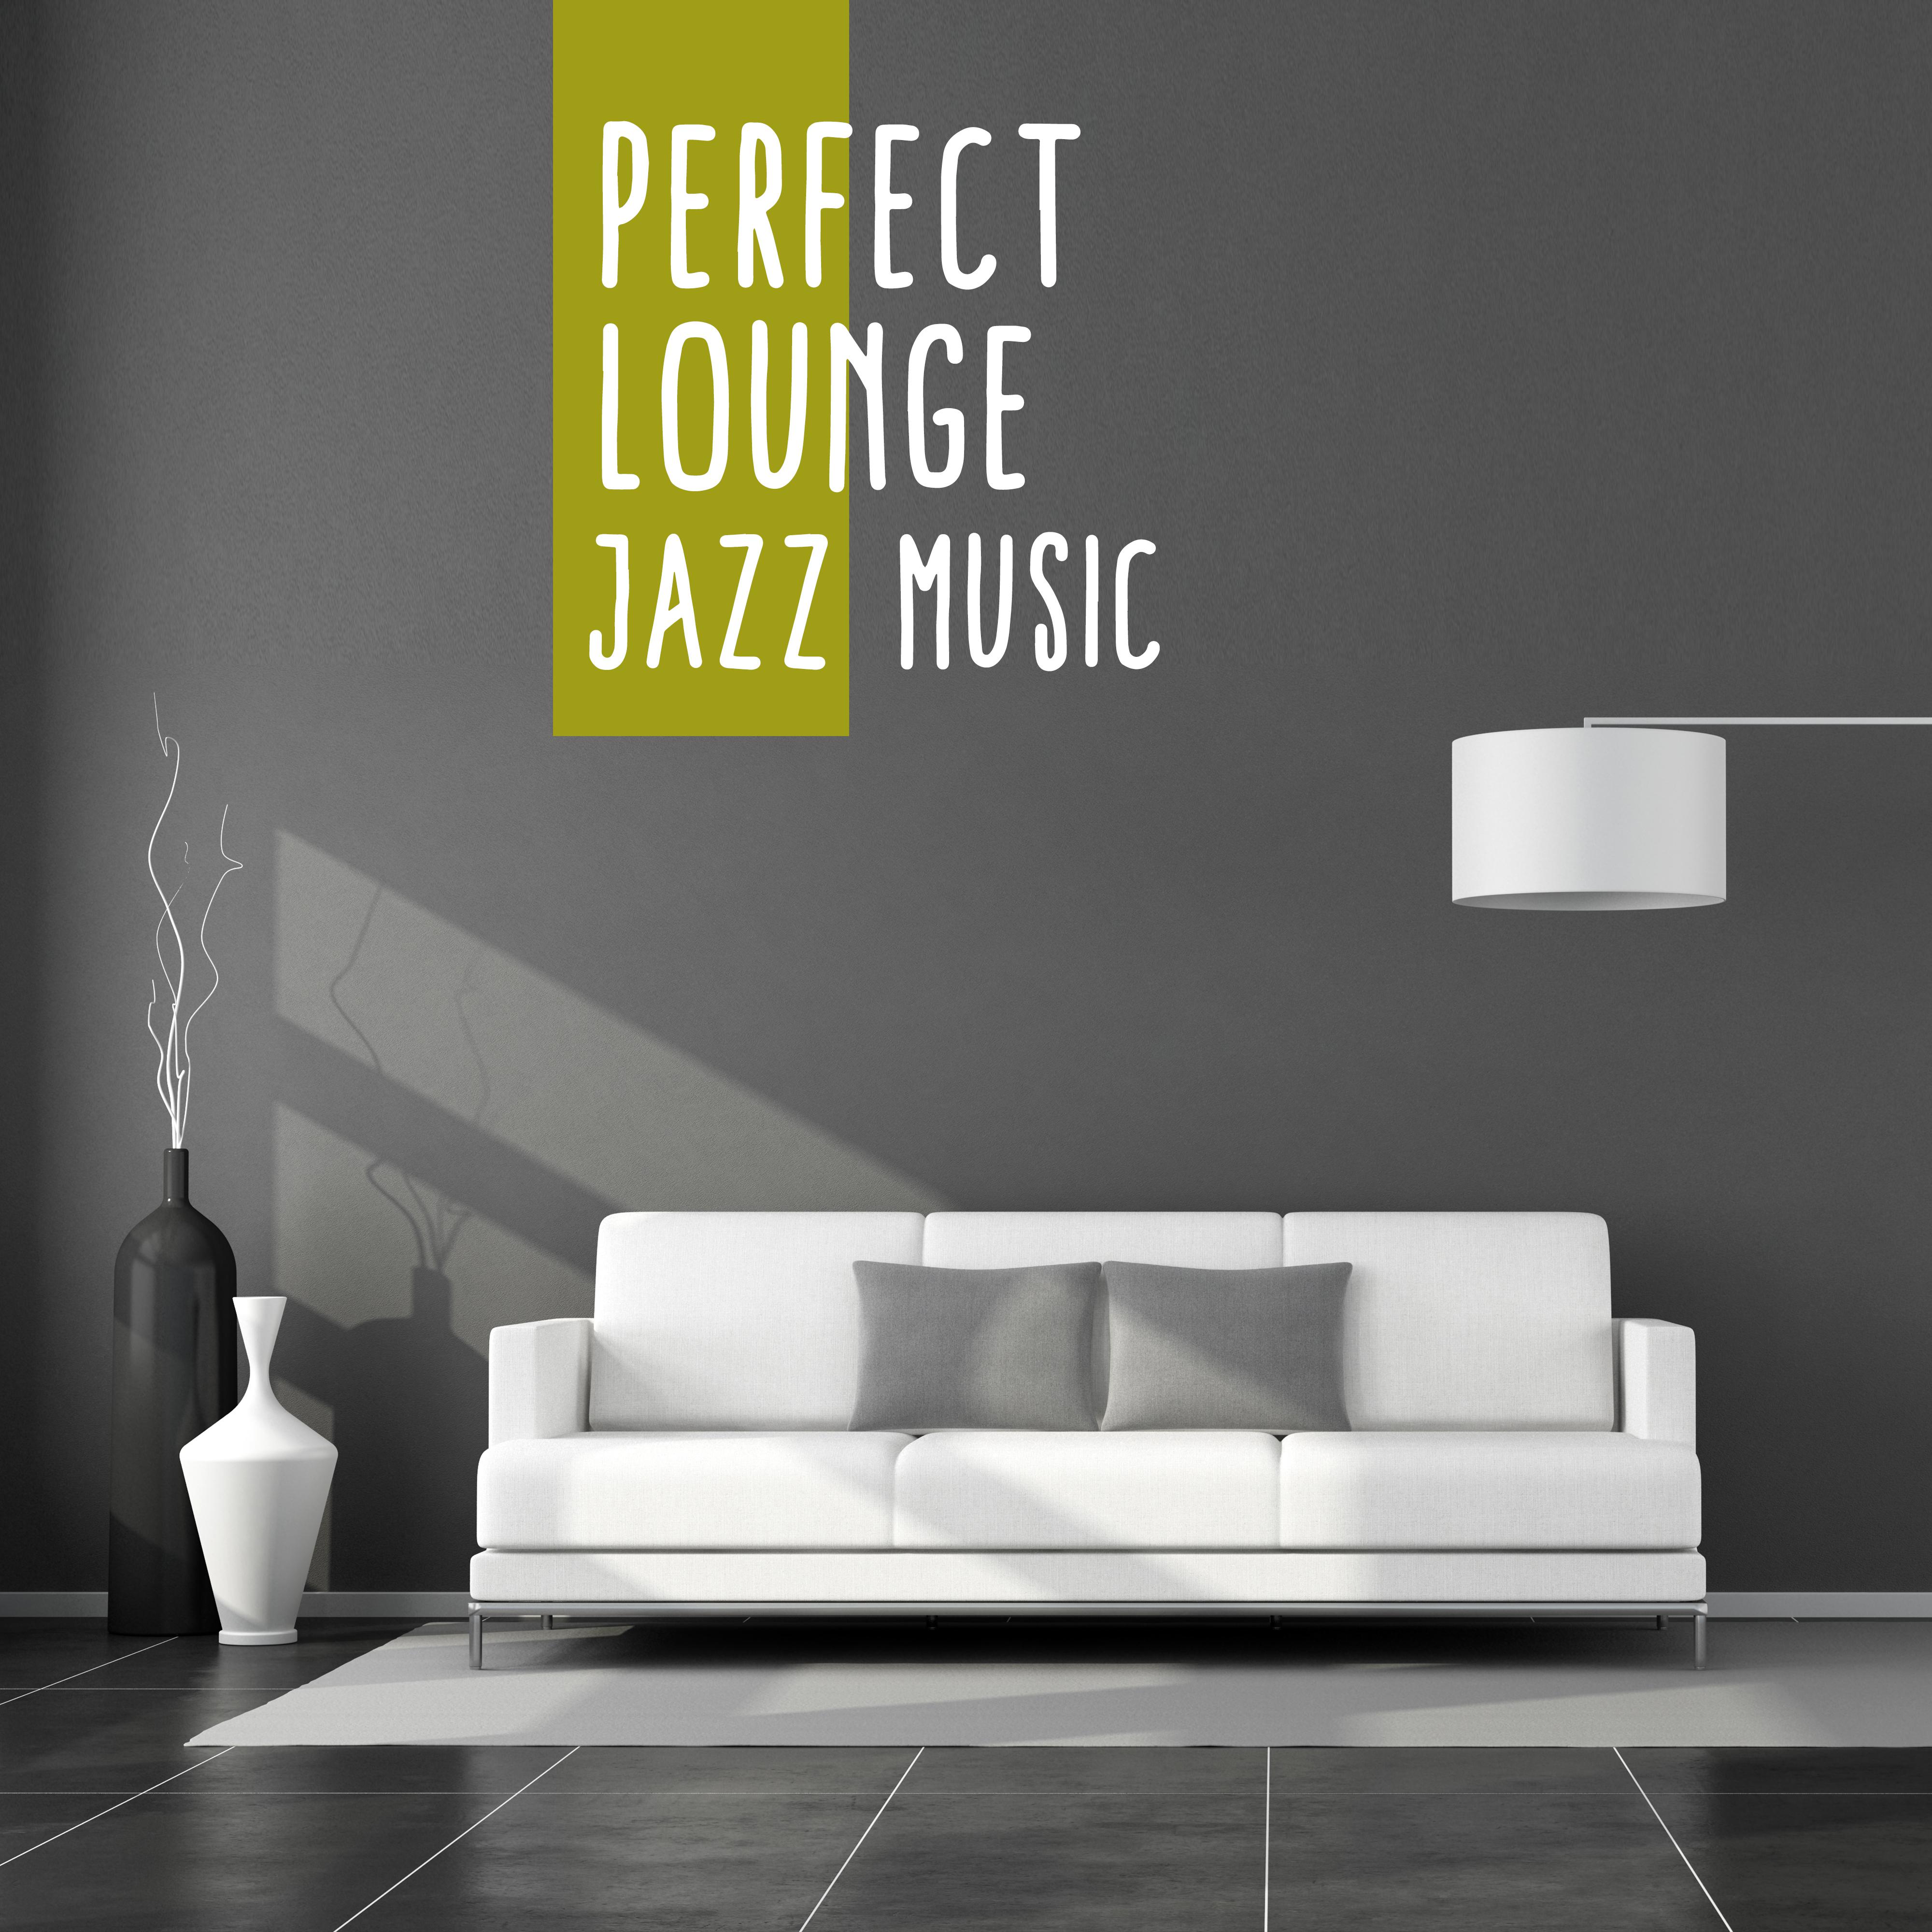 Perfect Lounge Jazz Music: 2019 Compilation of Smooth Instrumental Jazz, Elegant Vintage Rhythms for Restaurant or Hotel Lounge, Piano Melodies & Sounds of Guitar, Contrabass & More